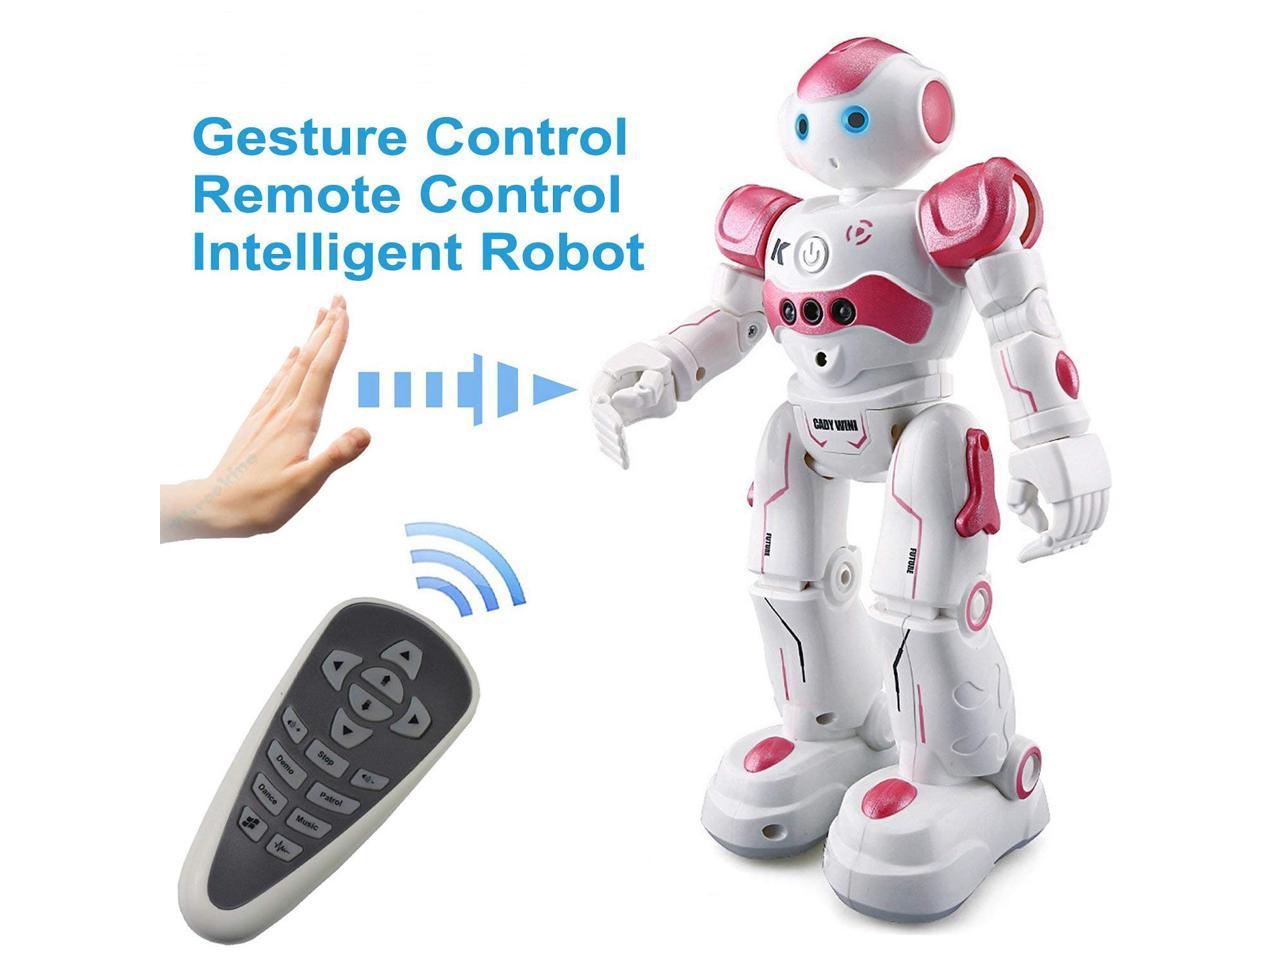 Intelligent Programmable RC Robot with Infrared Controller Toys,Dancing,Singing Moonwalking and LED Eyes,Gesture Sensing Robot Kit for Childrens Entertainment non Cargooy Best Gift for Kids Blue